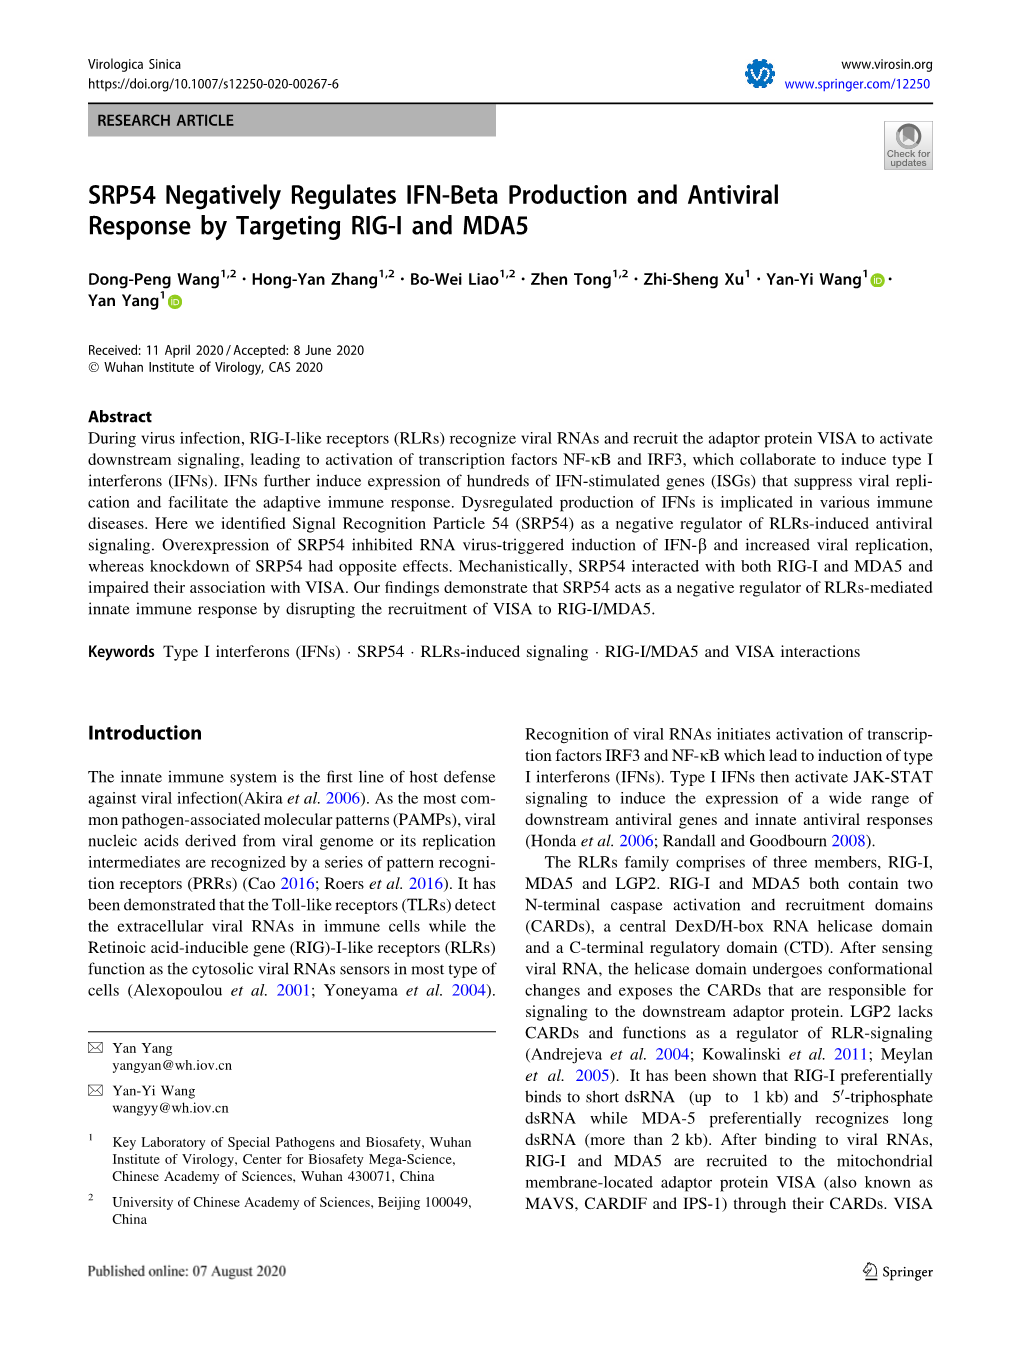 SRP54 Negatively Regulates IFN-Beta Production and Antiviral Response by Targeting RIG-I and MDA5